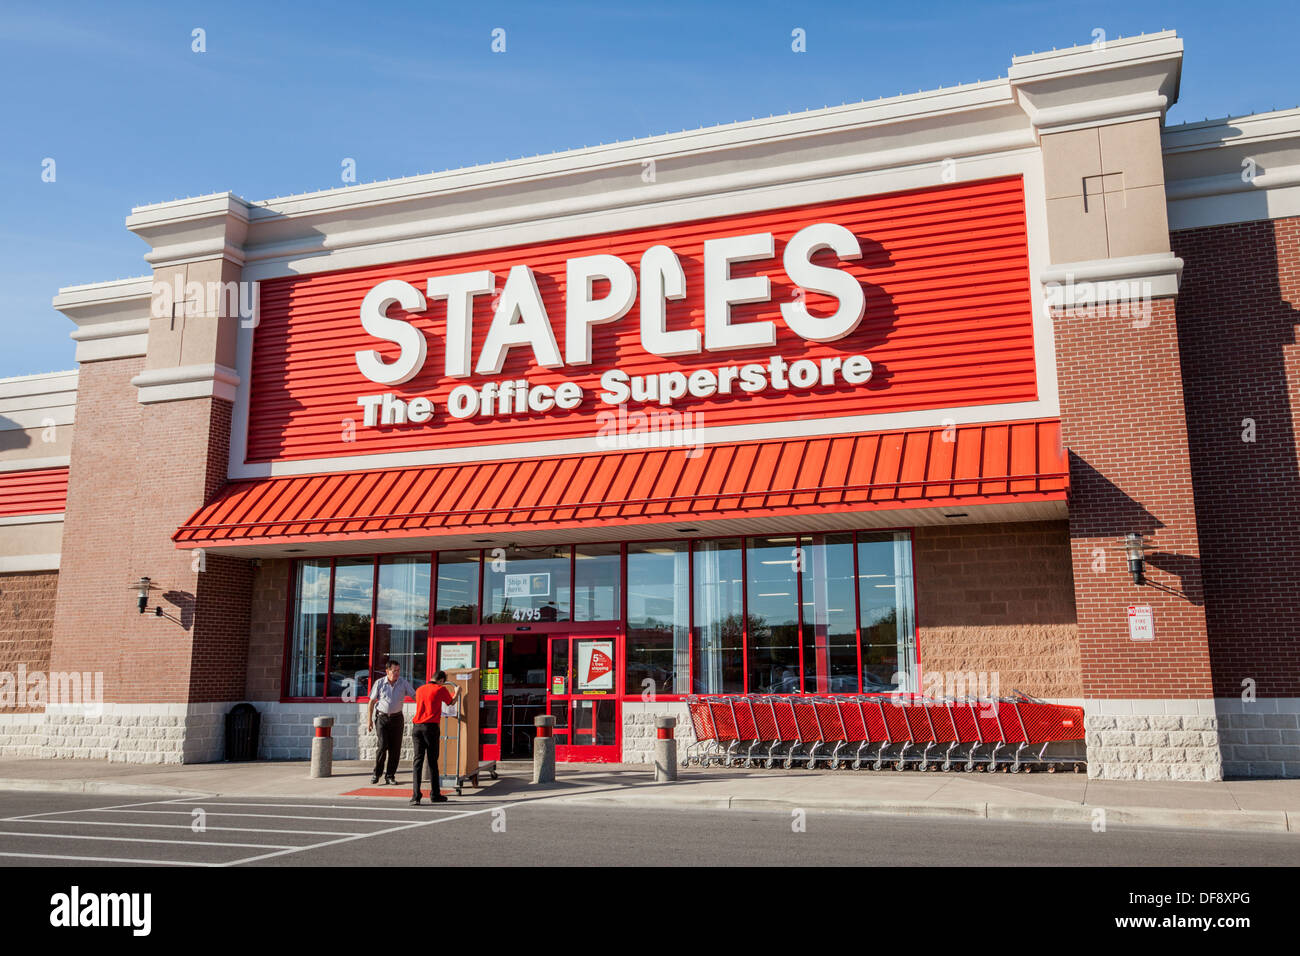 Staples Office Superstore, office supplies box store, this one in Utica, New York Stock Photo